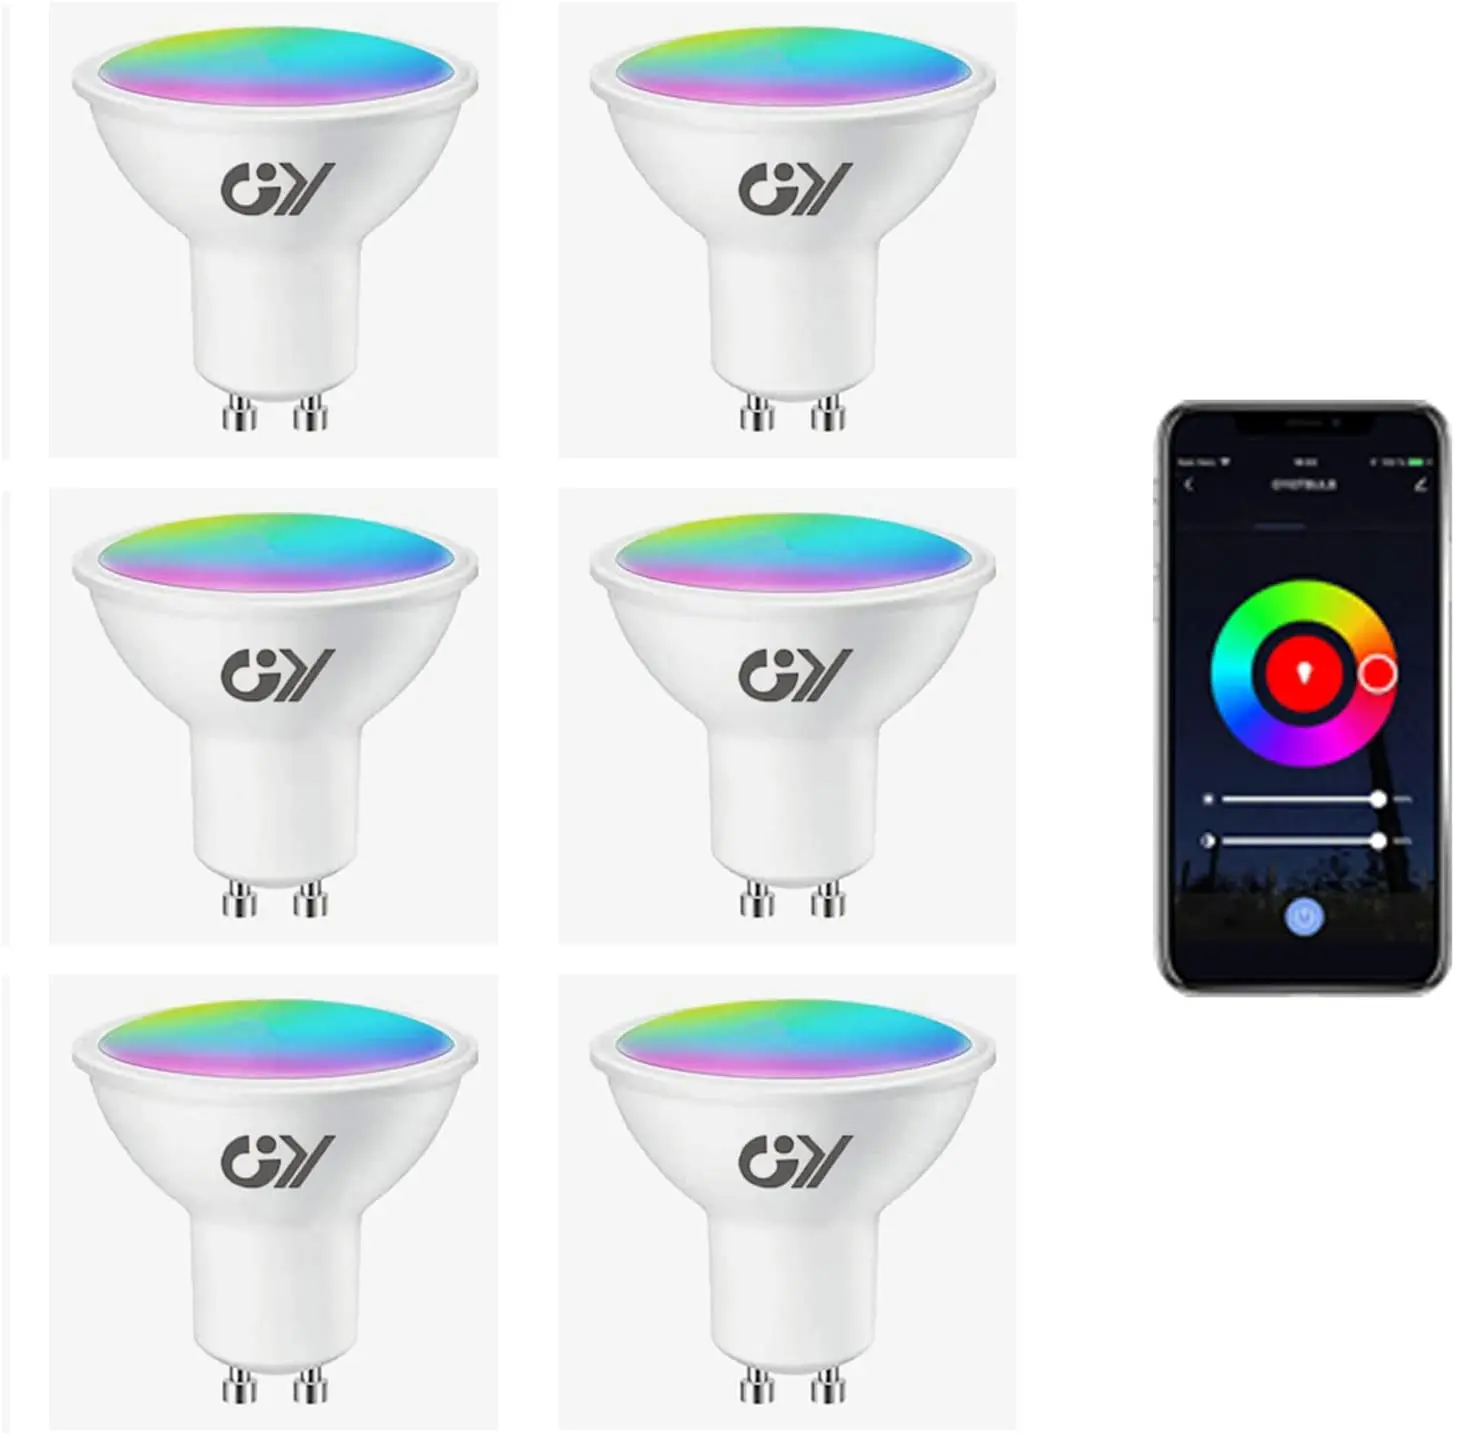 

GY 6 WiFi LED Smart Bulb Compatible with Alexa/Google Home 7W 500LM GU10 RGB LED Bulb Dimmable 16M Warm/Cool White 2700K-6500K